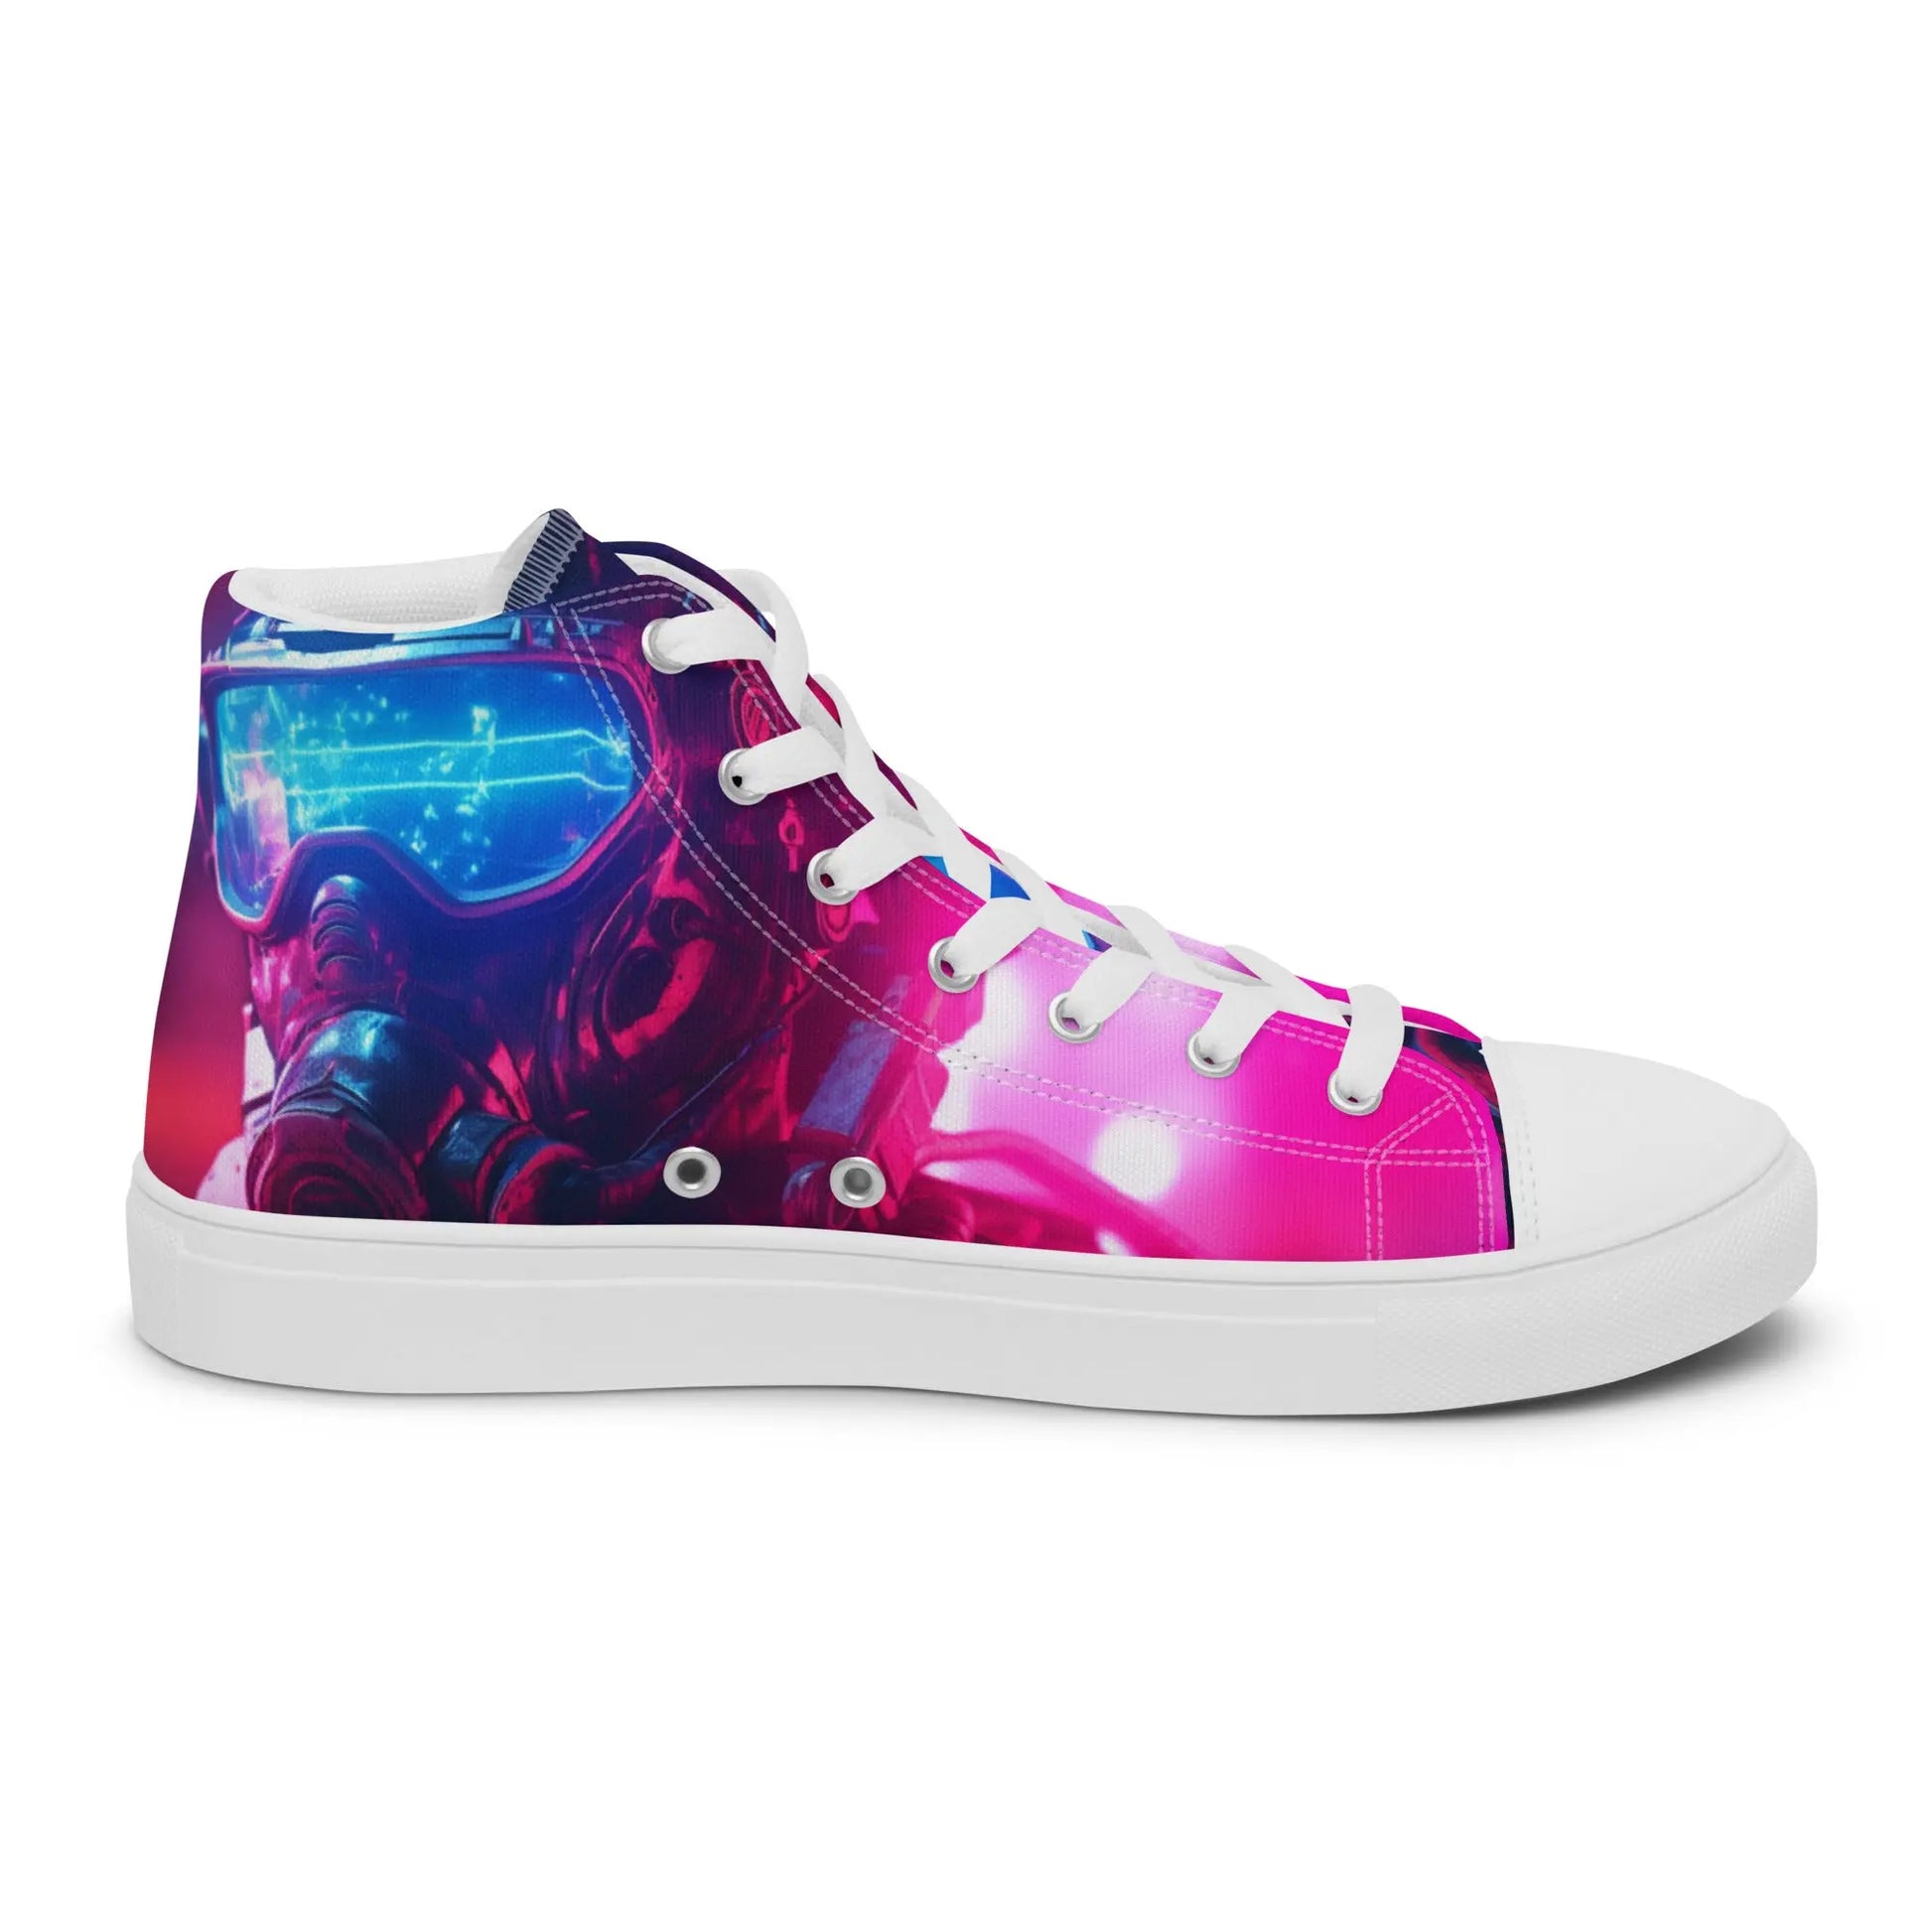 StormStrike High Top Sneakers: AI-Engineered, Unisex, Embrace the Electrifying Warrior, Durable, Comfortable, Thunder-Themed Footwear Kinetic Footwear